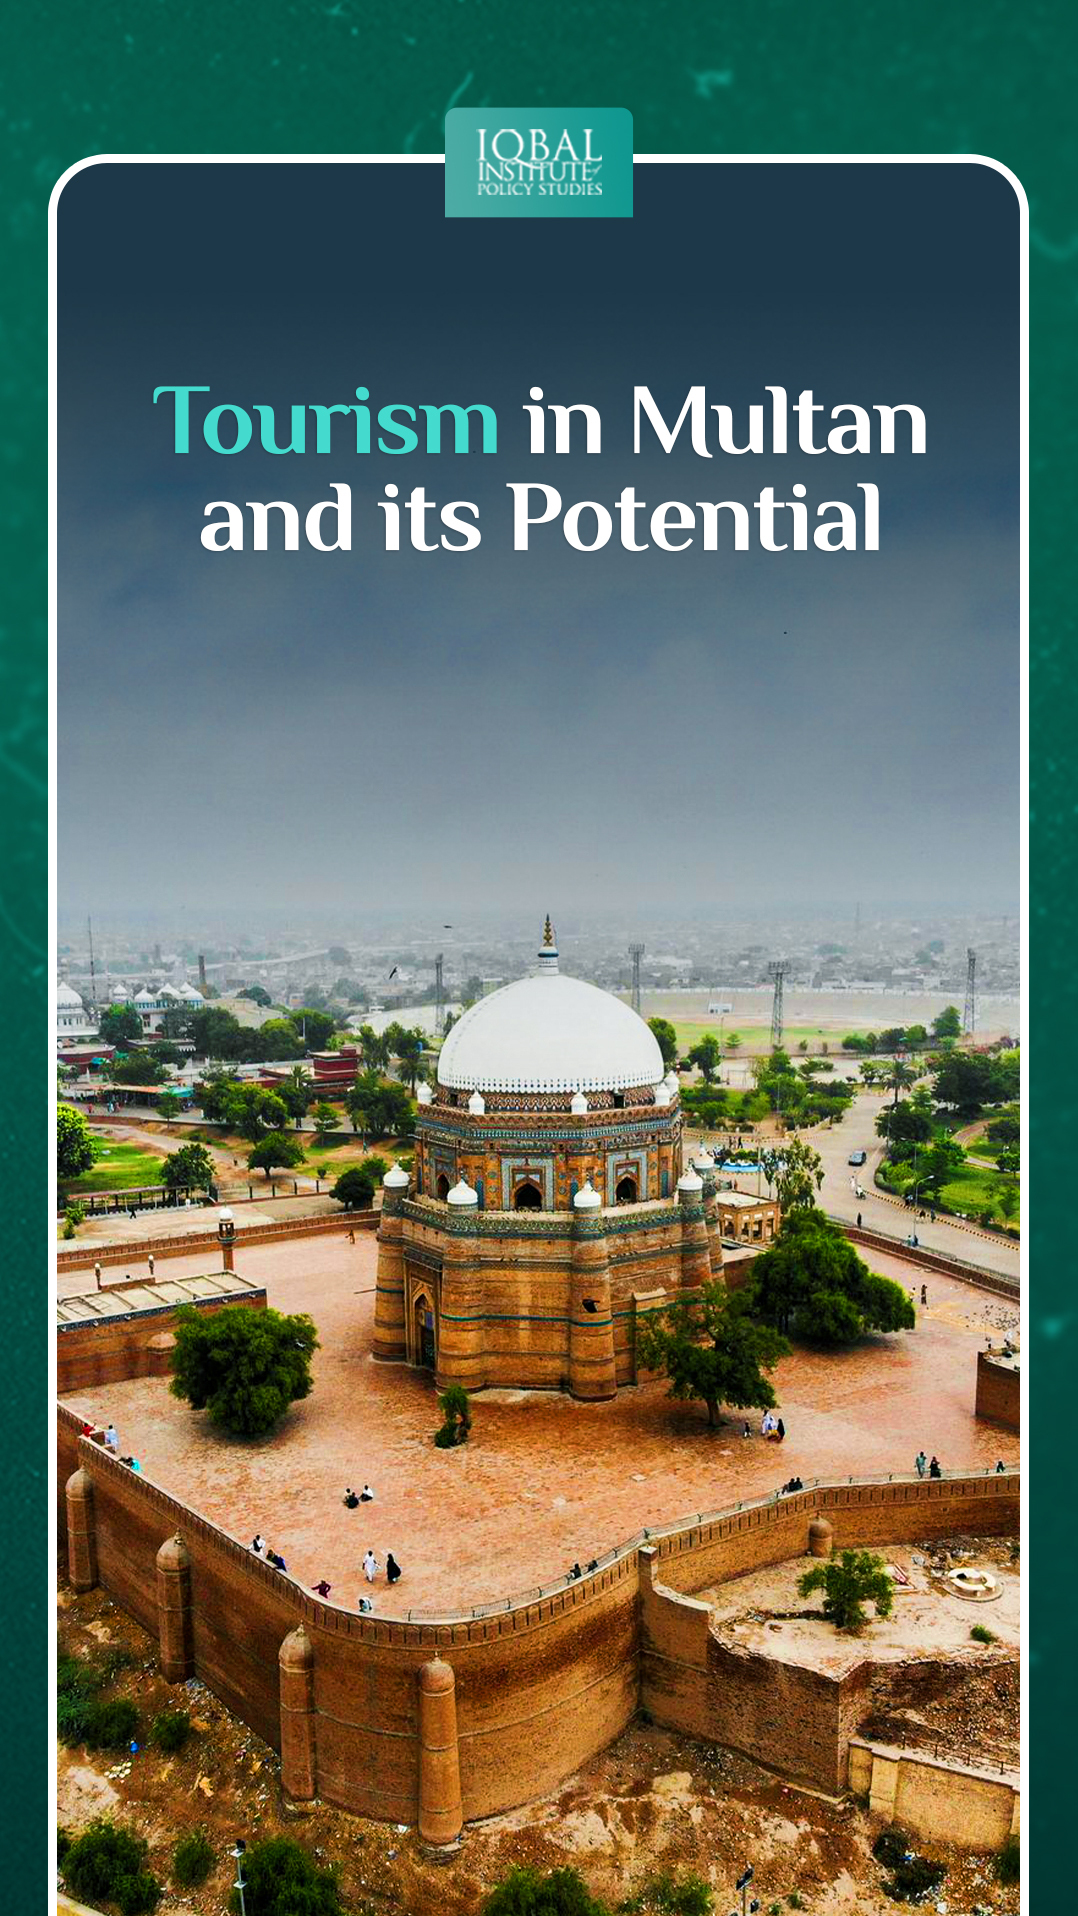 Tourism in Multan and its potential